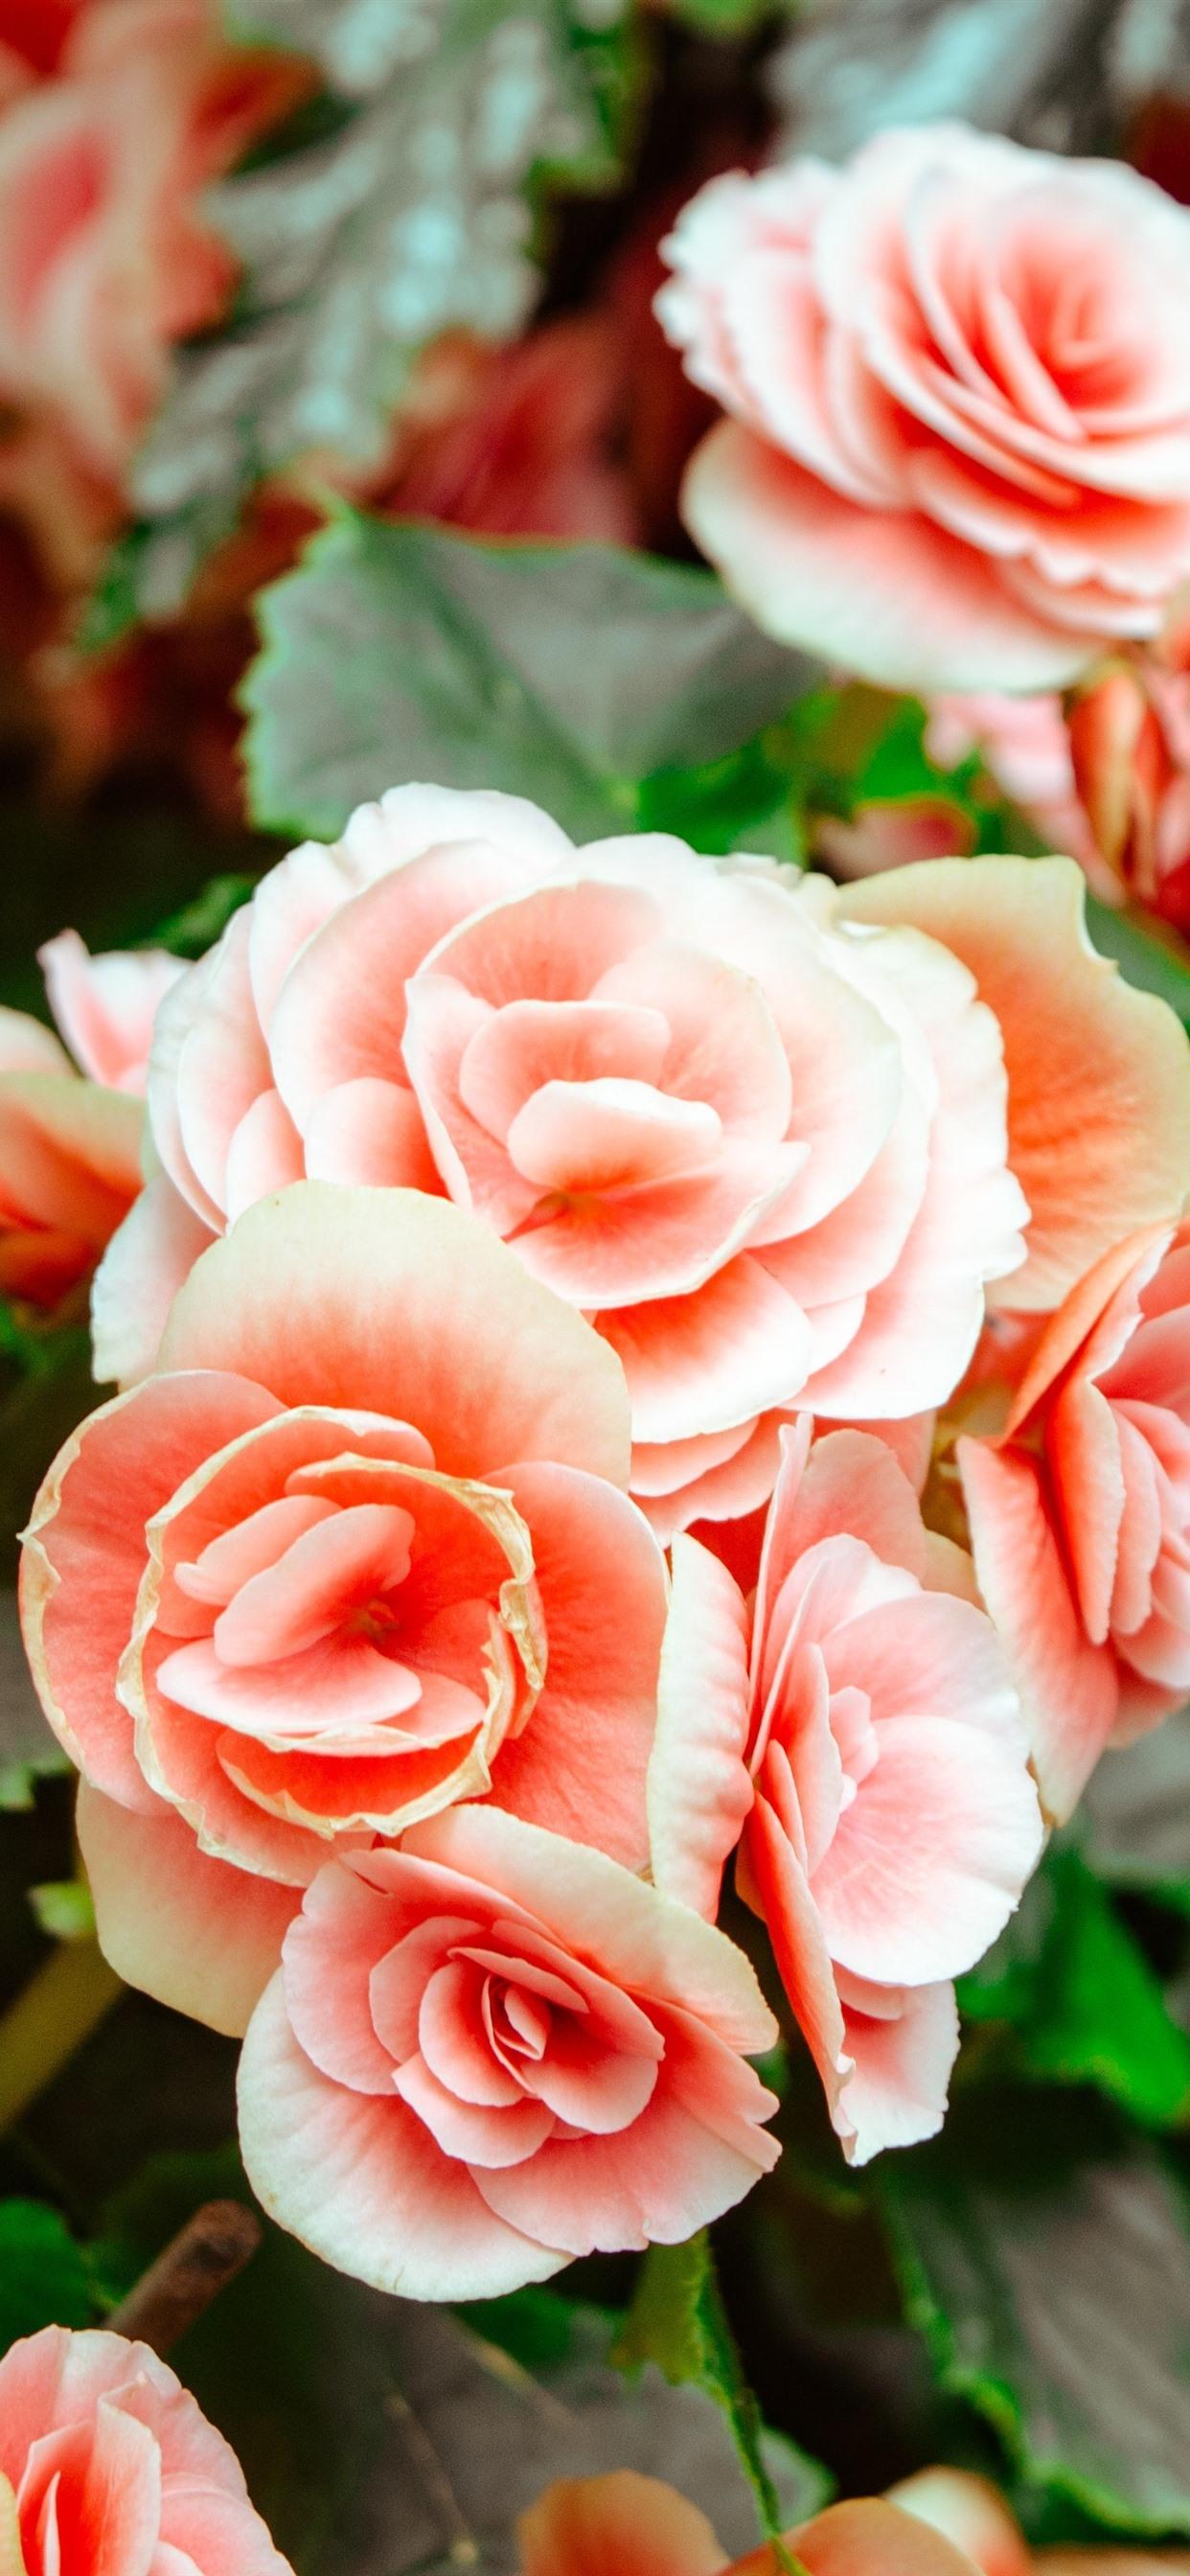 Pink begonia, flowers 1242x2688 iPhone XS Max wallpaper, background